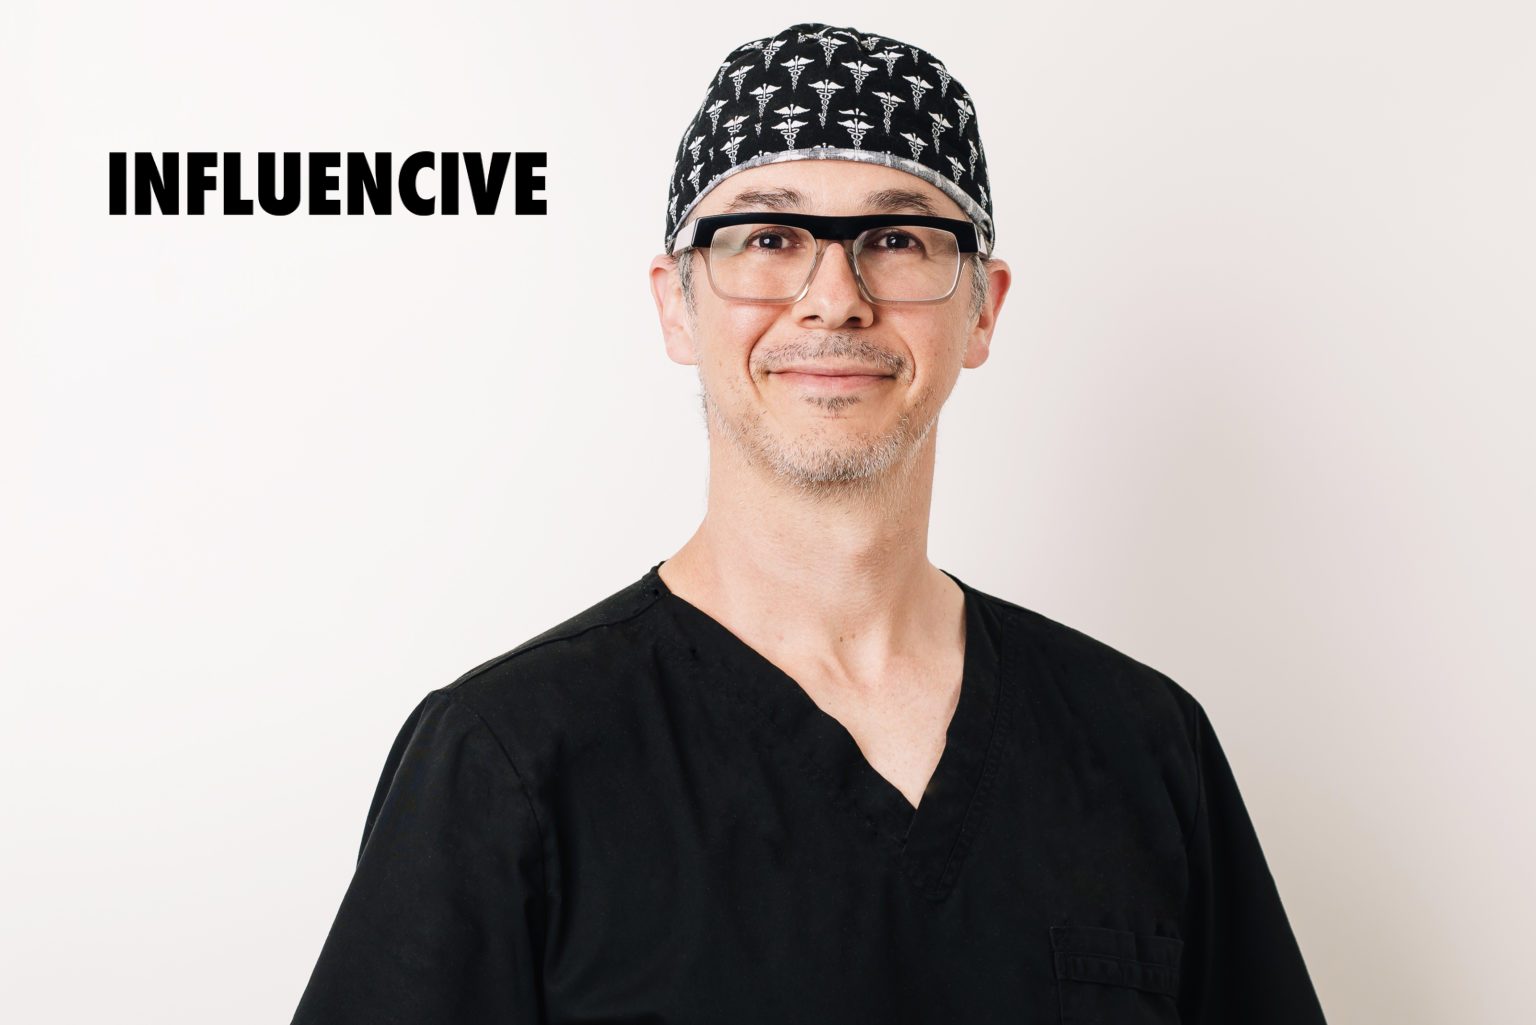 Dr. Jugenburg sixsurgery turned 350 patients away in 2019 influencive article